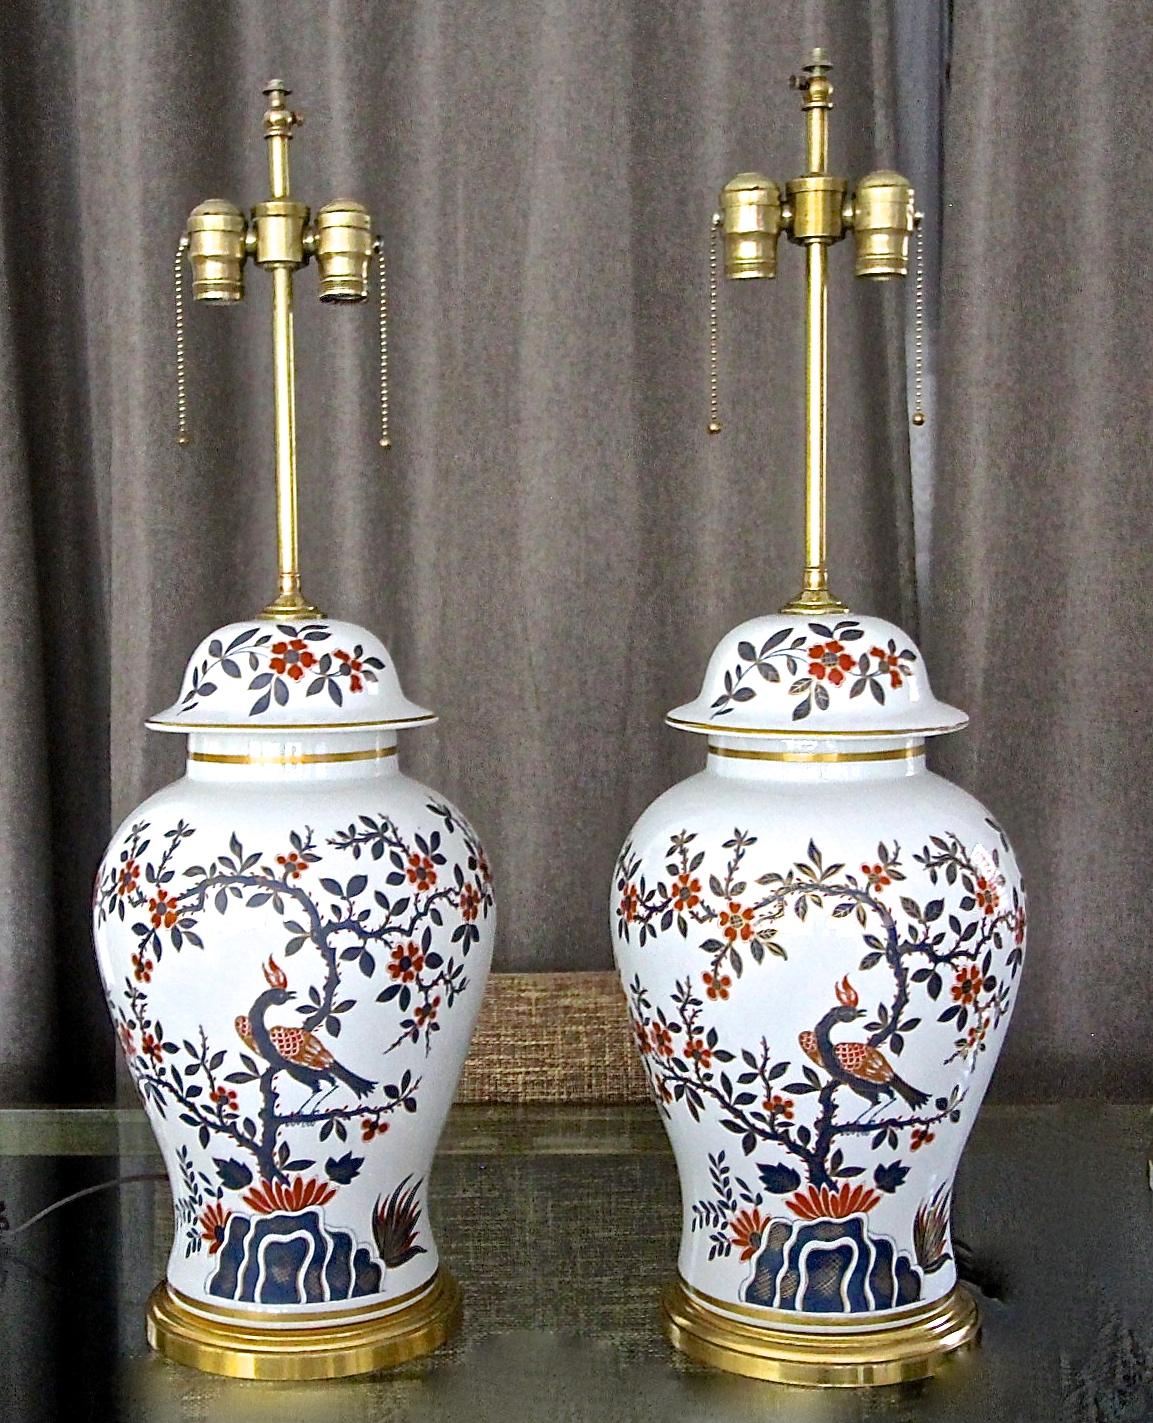 Pair of French porcelain lidded vase Chinoiserie style table lamps resting brass bases. Nicely detailed with peacock bird and floral motif. Hand painted in red and blue with gold highlight trim. Each with double cluster brass pull chain sockets and